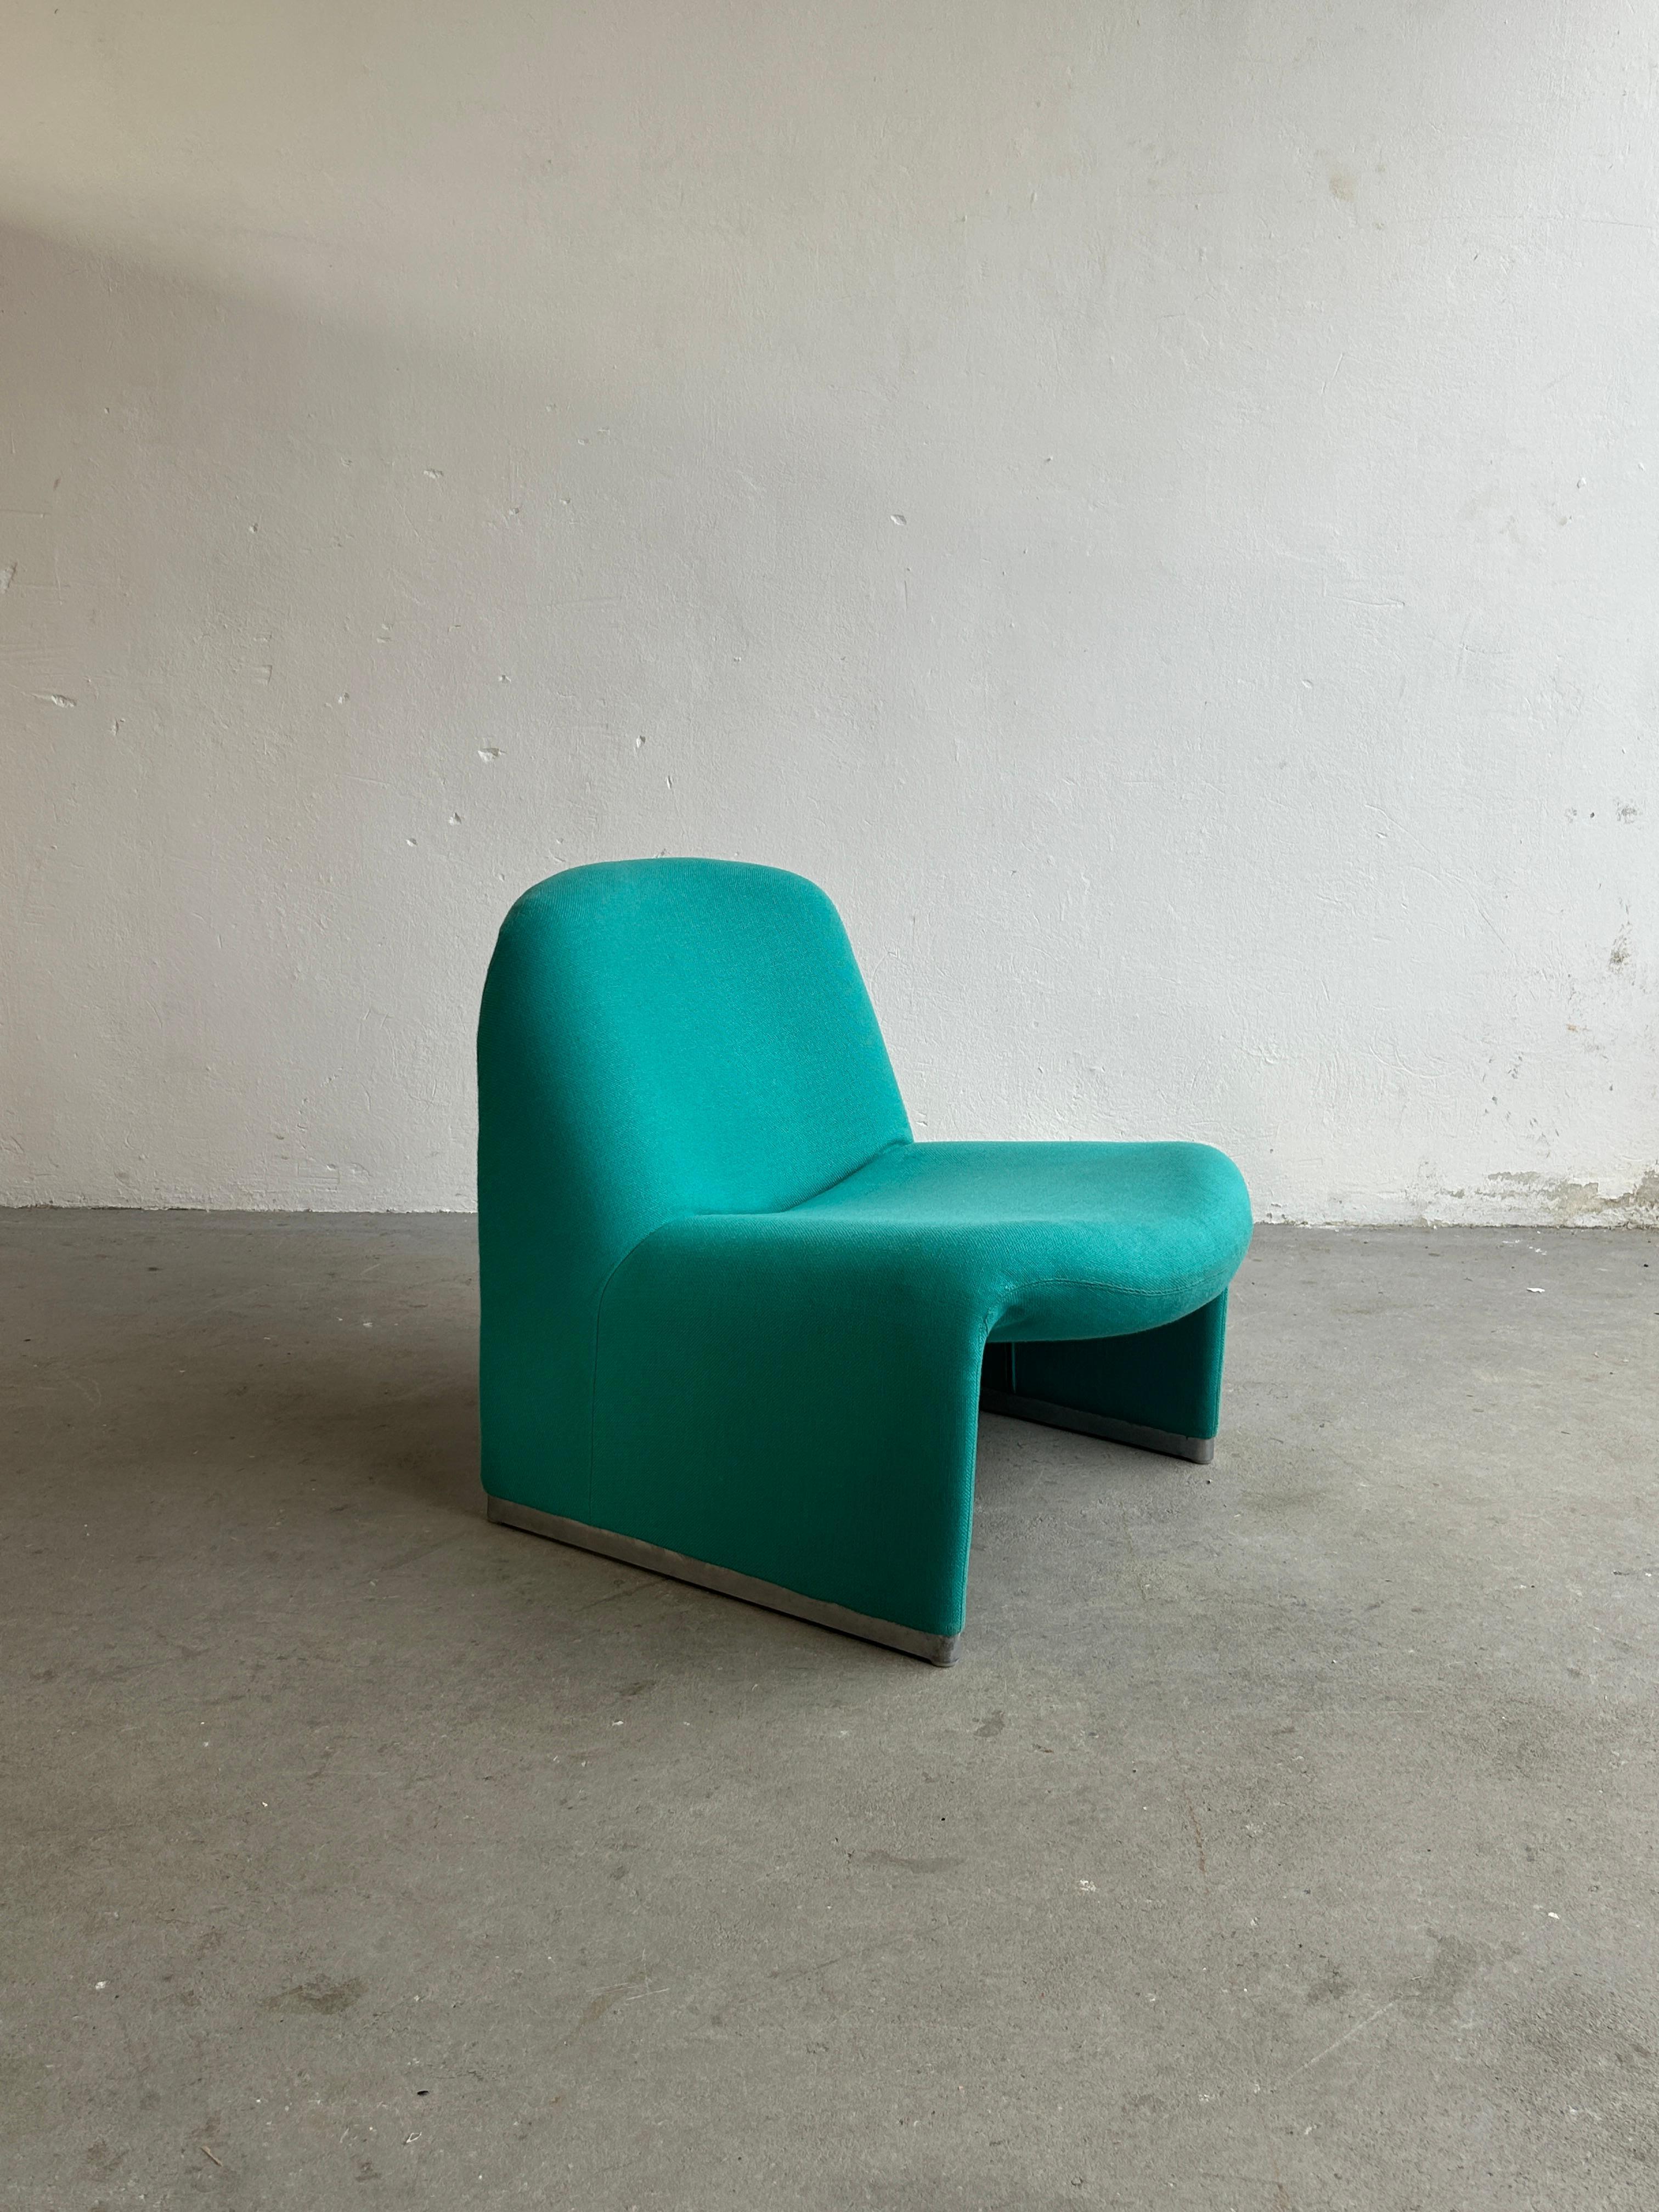 A vintage iconic 'Alky' chair in green fabric, designed by Giancarlo Piretti for Anonima Castelli. Produced in the late 1970s in Italy.
Iconic Italian design.

Overall very well preserved and in very good vintage condition with expected signs of